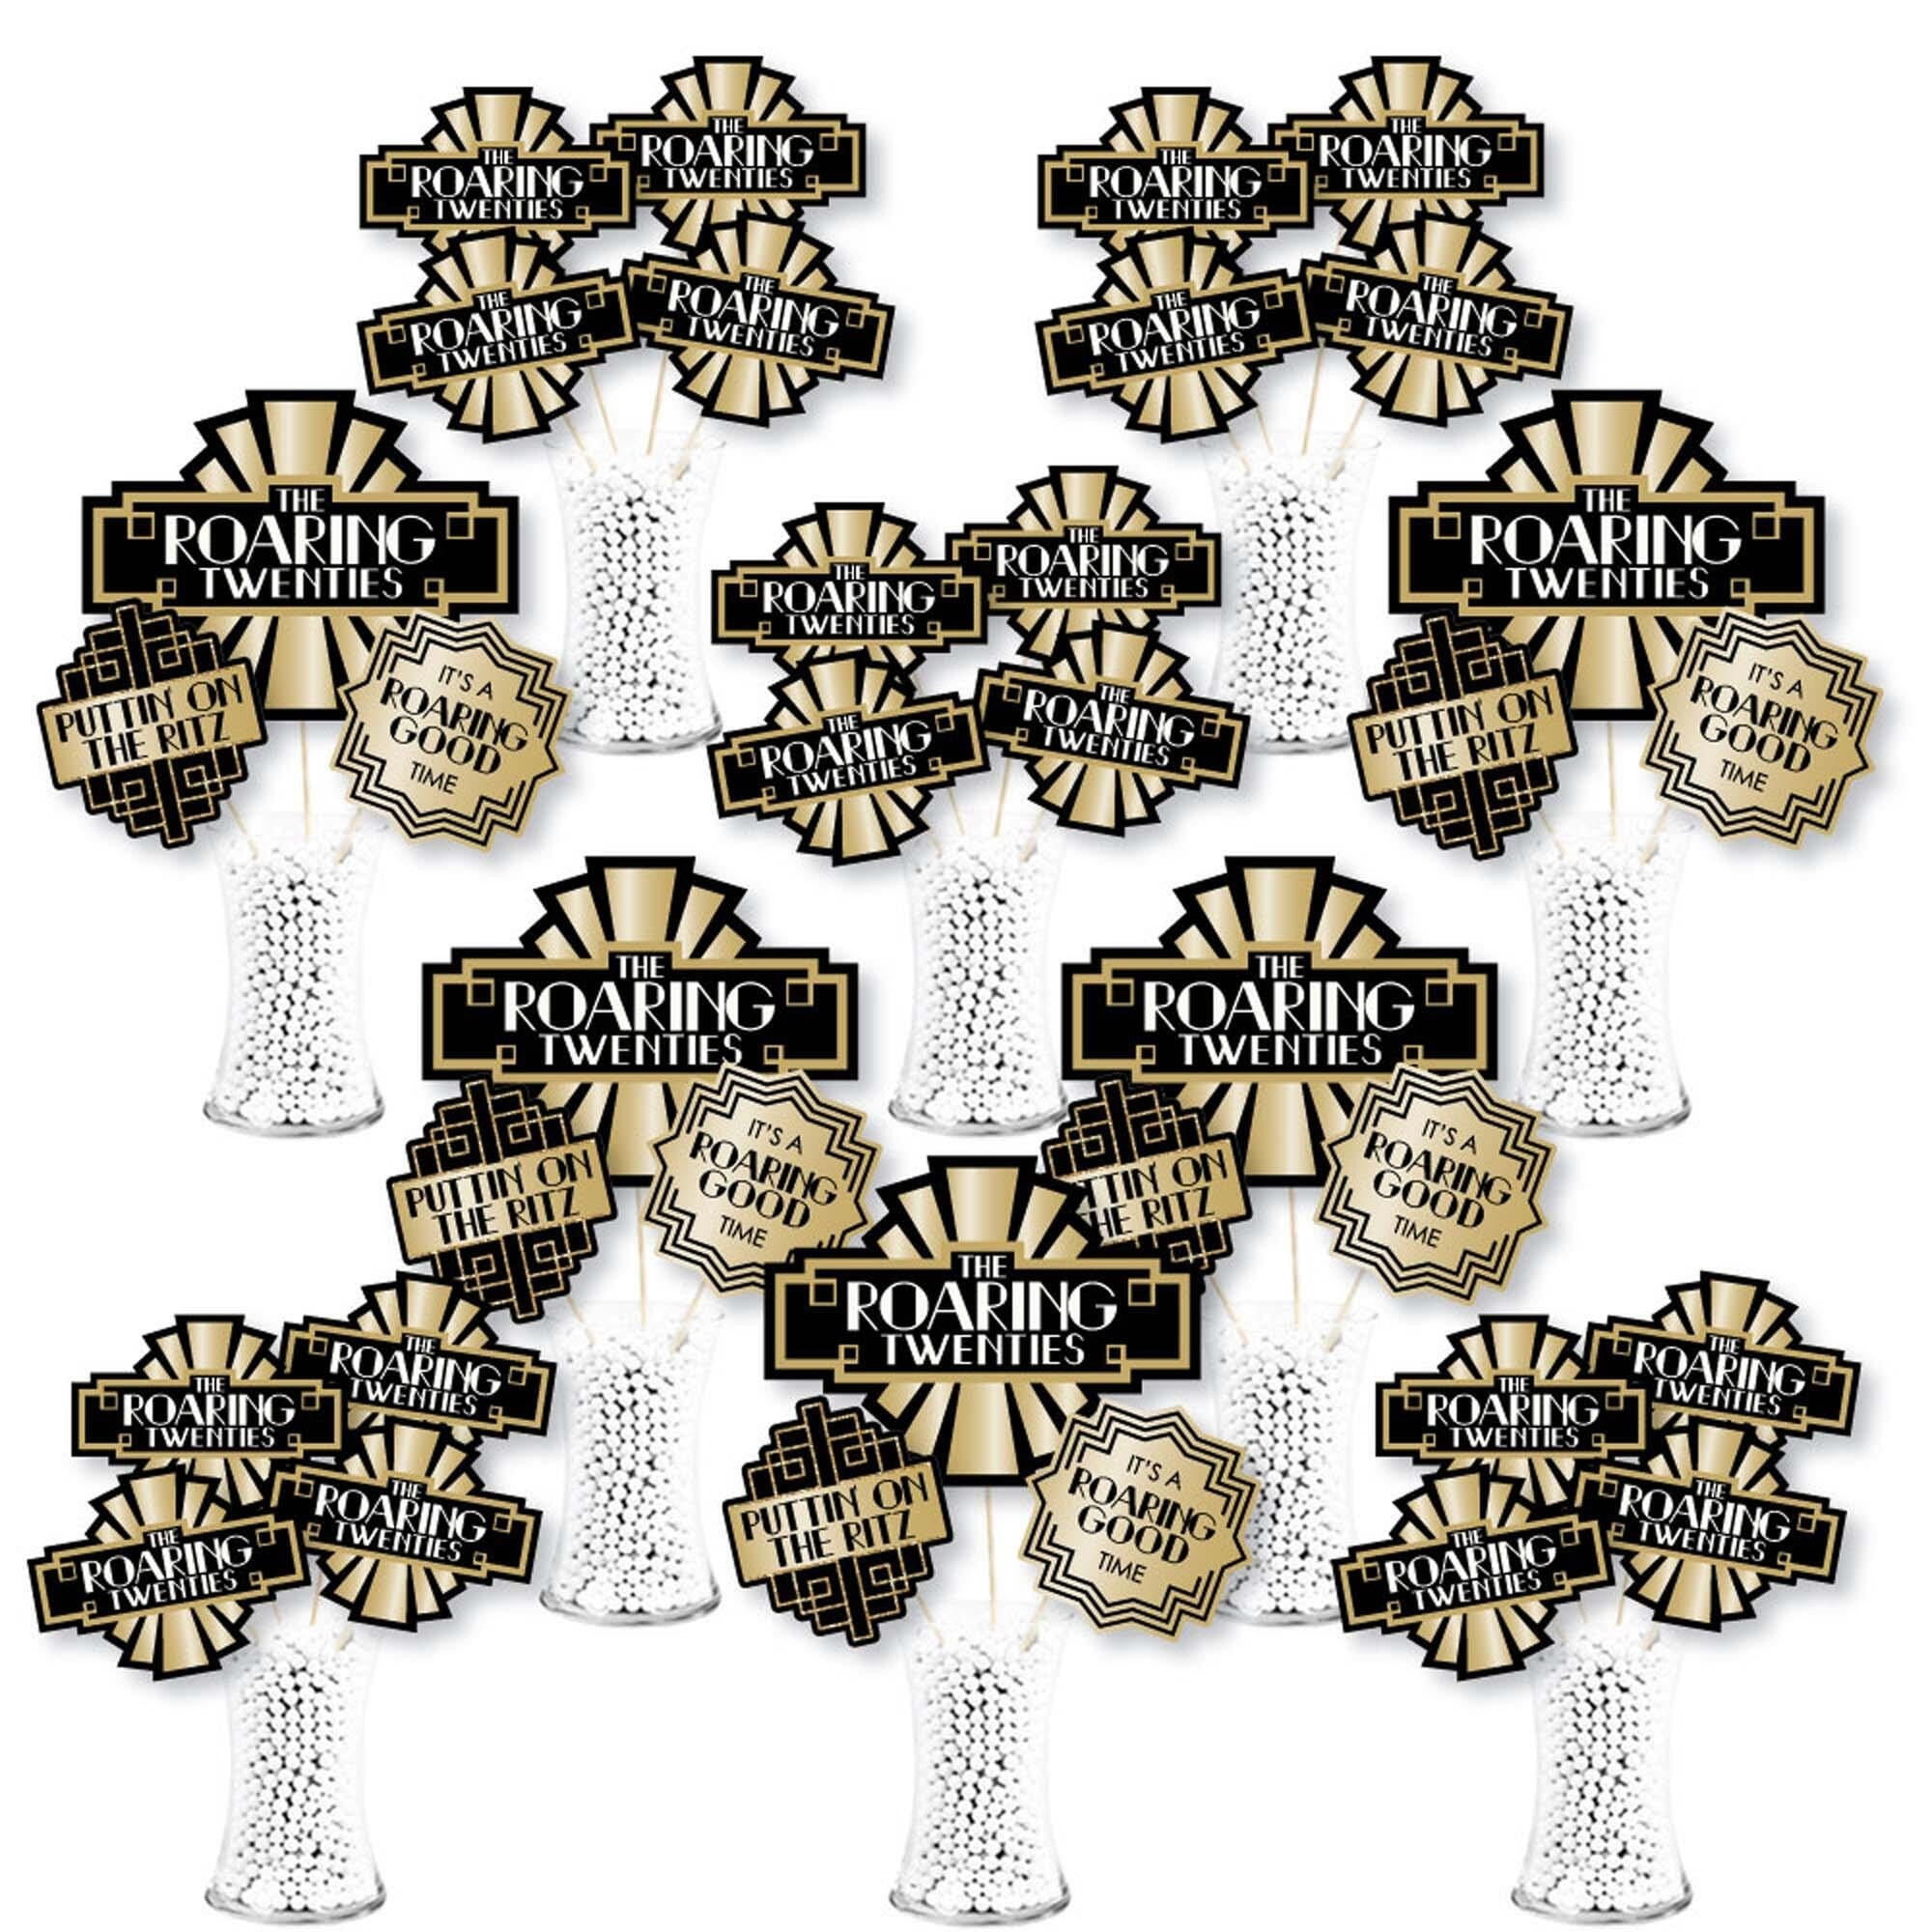 15 Pieces Roaring 20s Party Decorations,1920s Party Decorations, Roaring  20s Wall Signs, Roaring 20s Retro Party, Roaring Twenties Decorations Kit